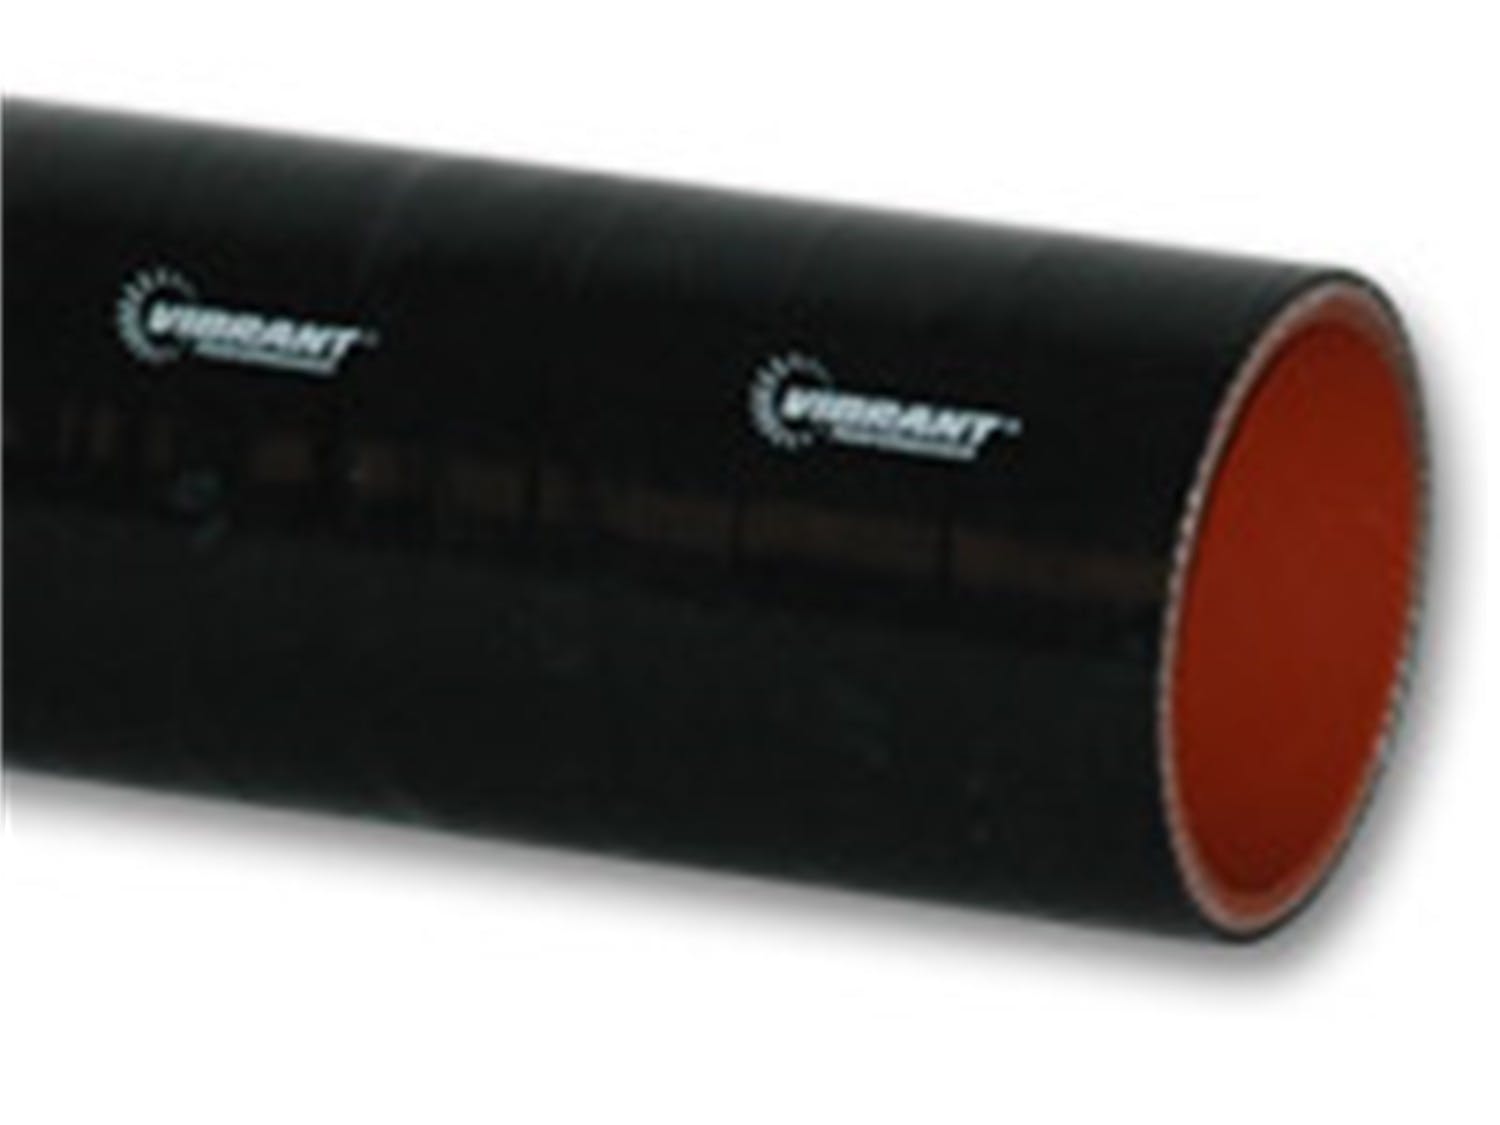 Vibrant Performance 2713 4 Ply Silicone Sleeve, 2.75 inch I.D. x 36 inch Long - Black